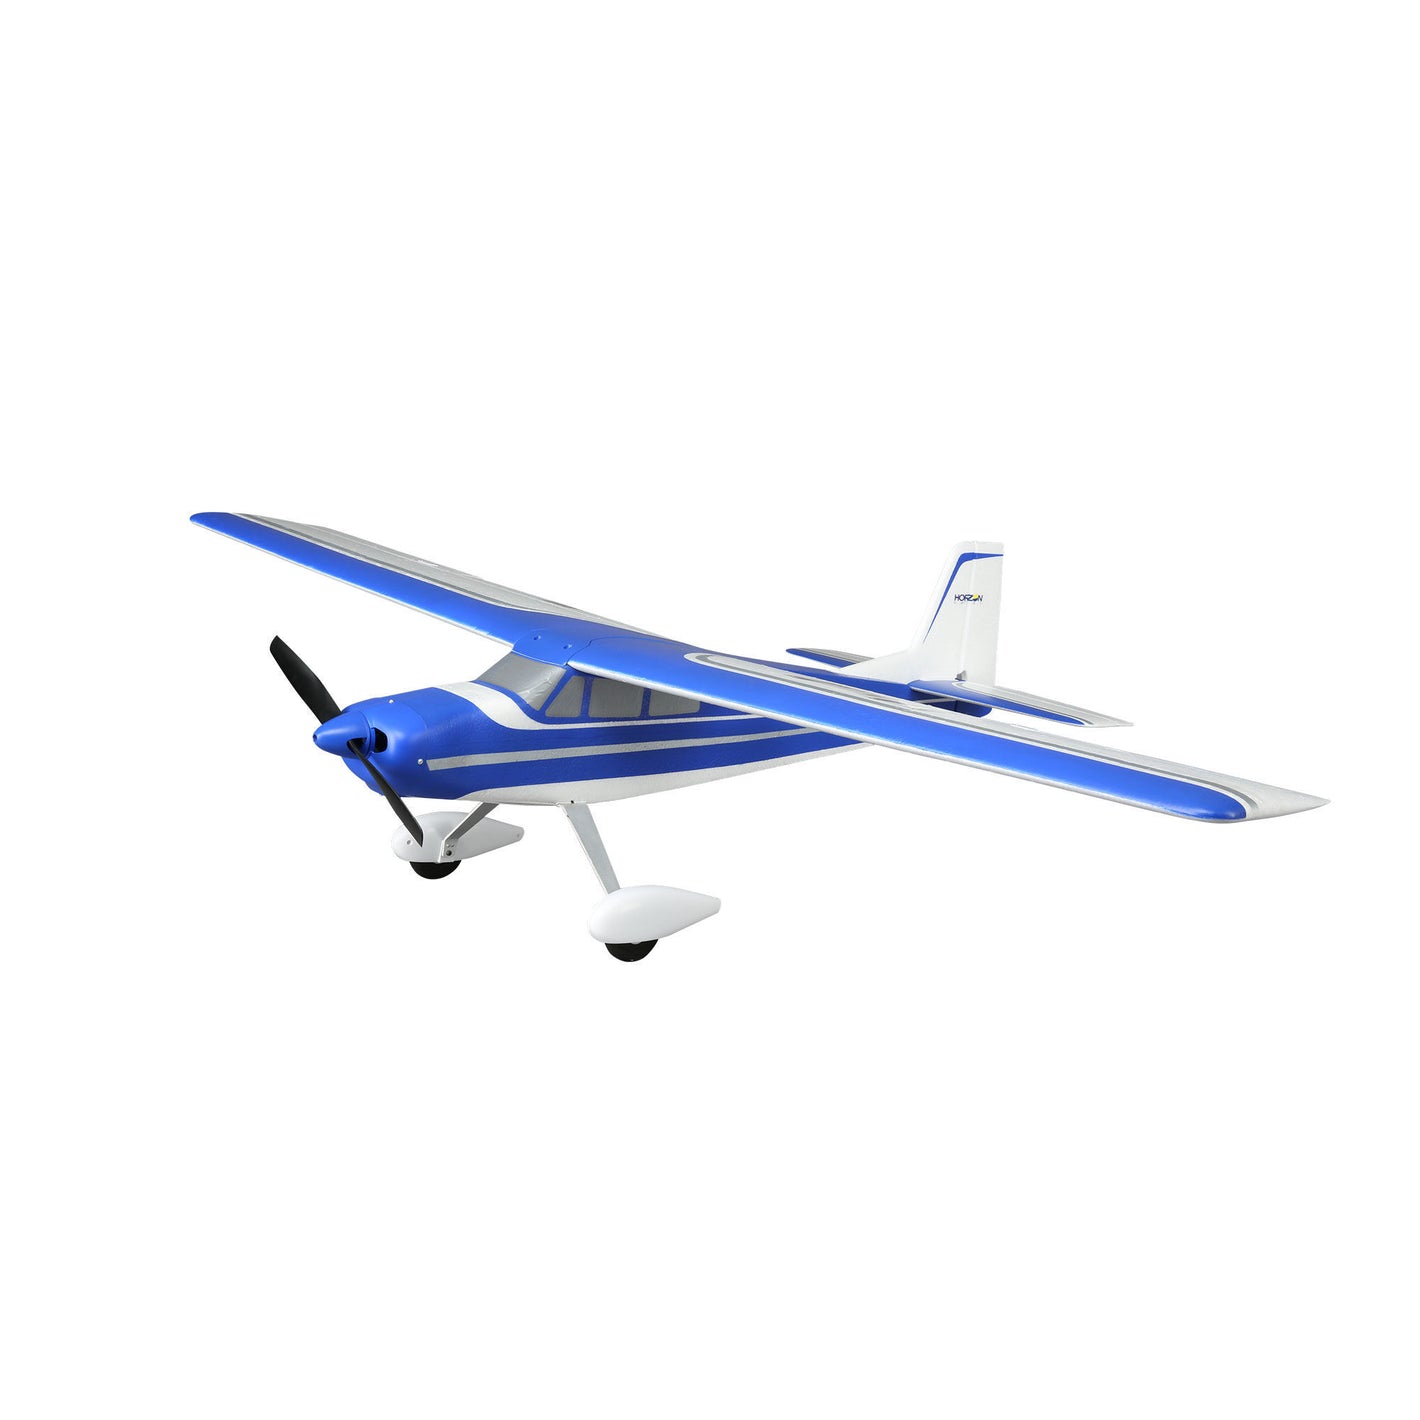 E-flite Valiant 1.3m BNF Basic with AS3X and SAFE Select EFL49500